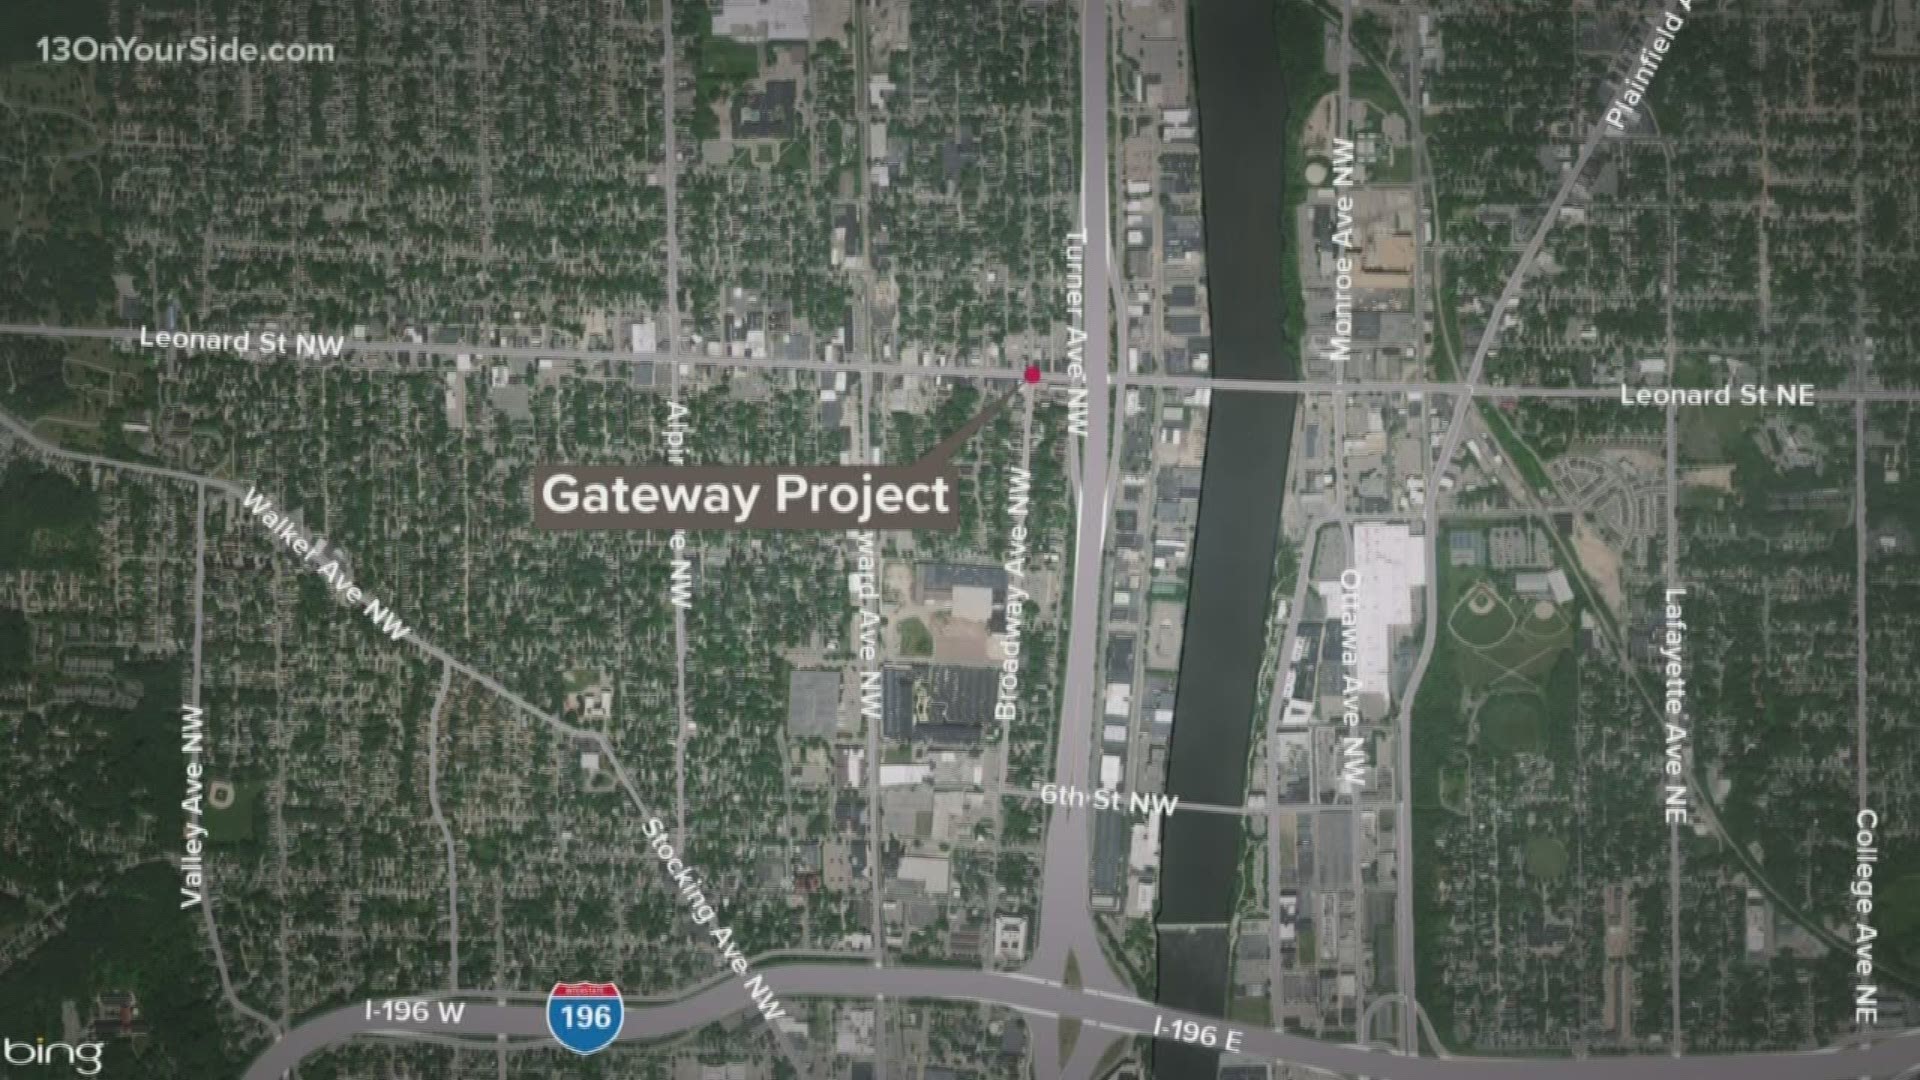 It is being called the "gateway" project.